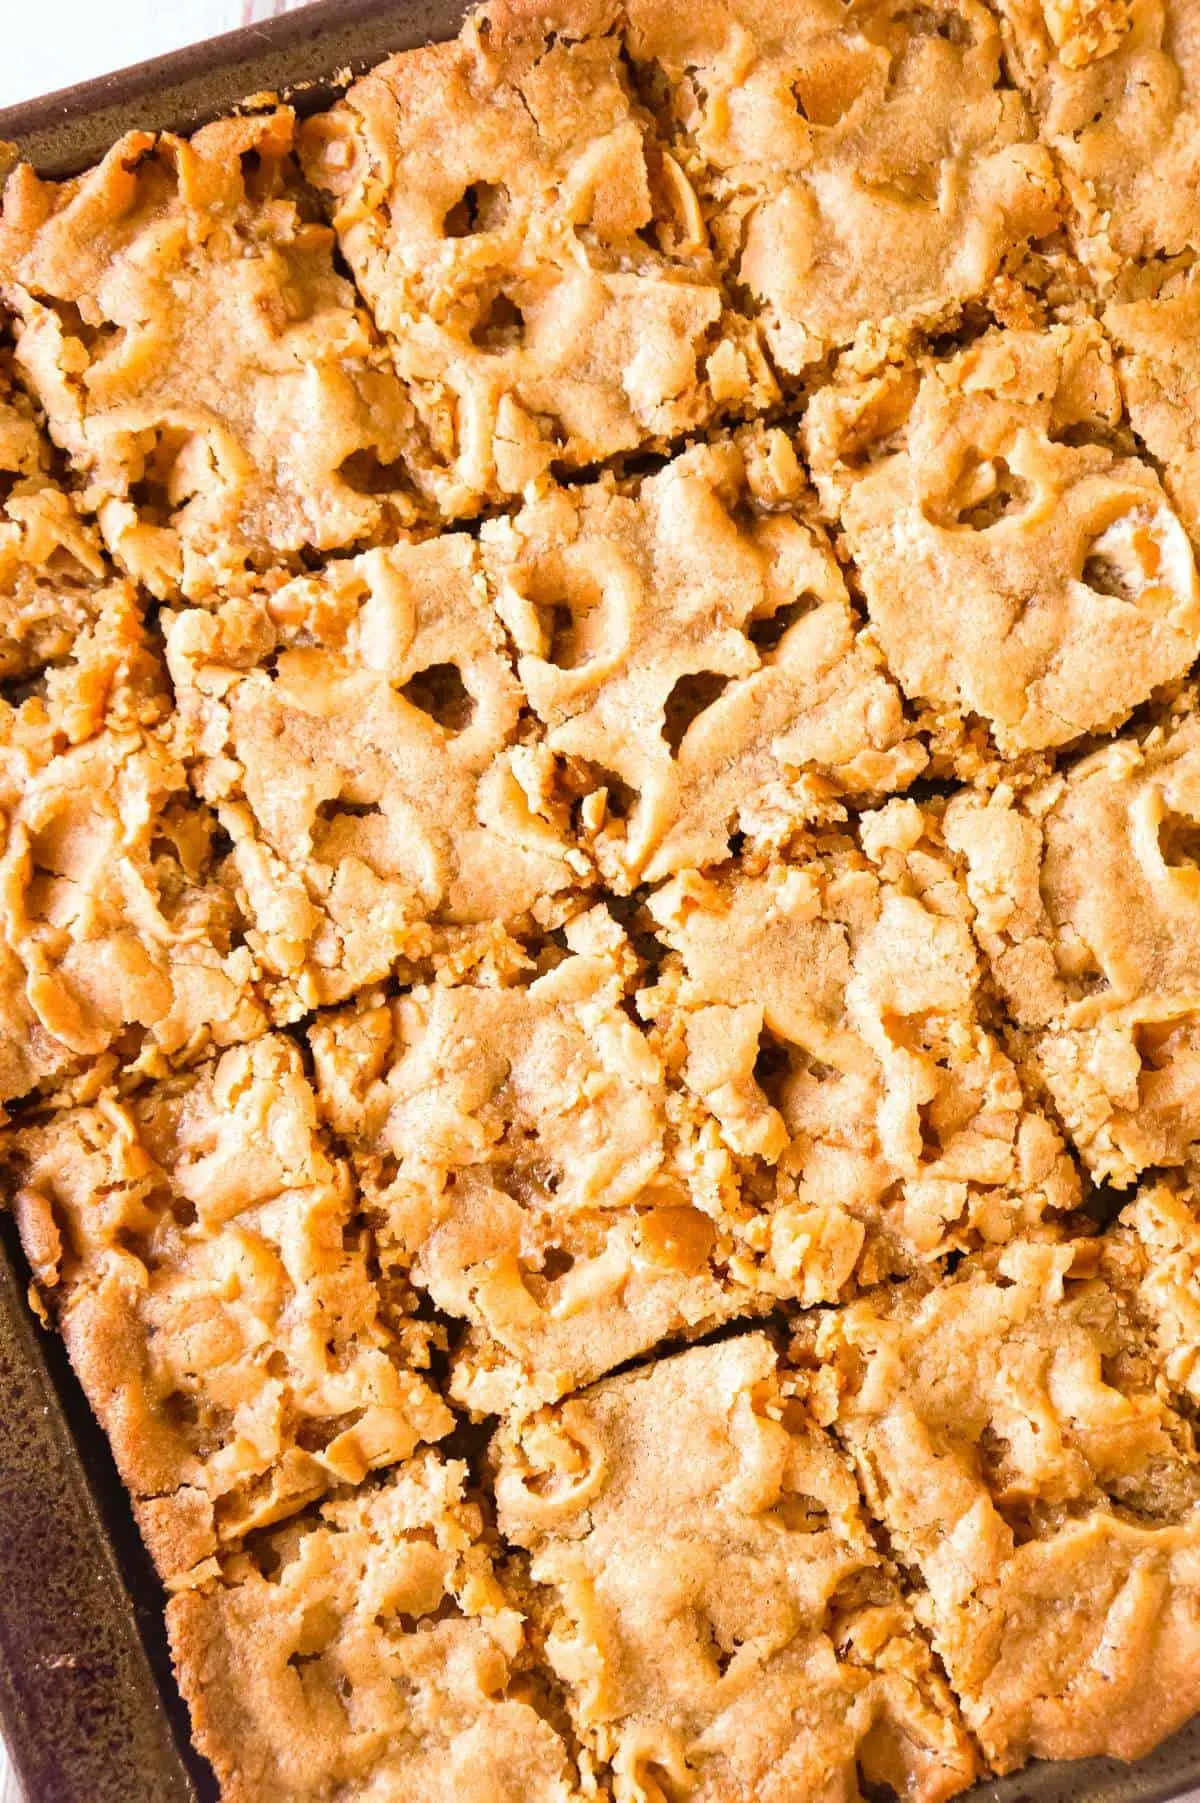 Peanut Butter Marshmallow Cookie Bars are soft and chewy peanut butter cookies loaded with mini marshmallows and toffee bits.